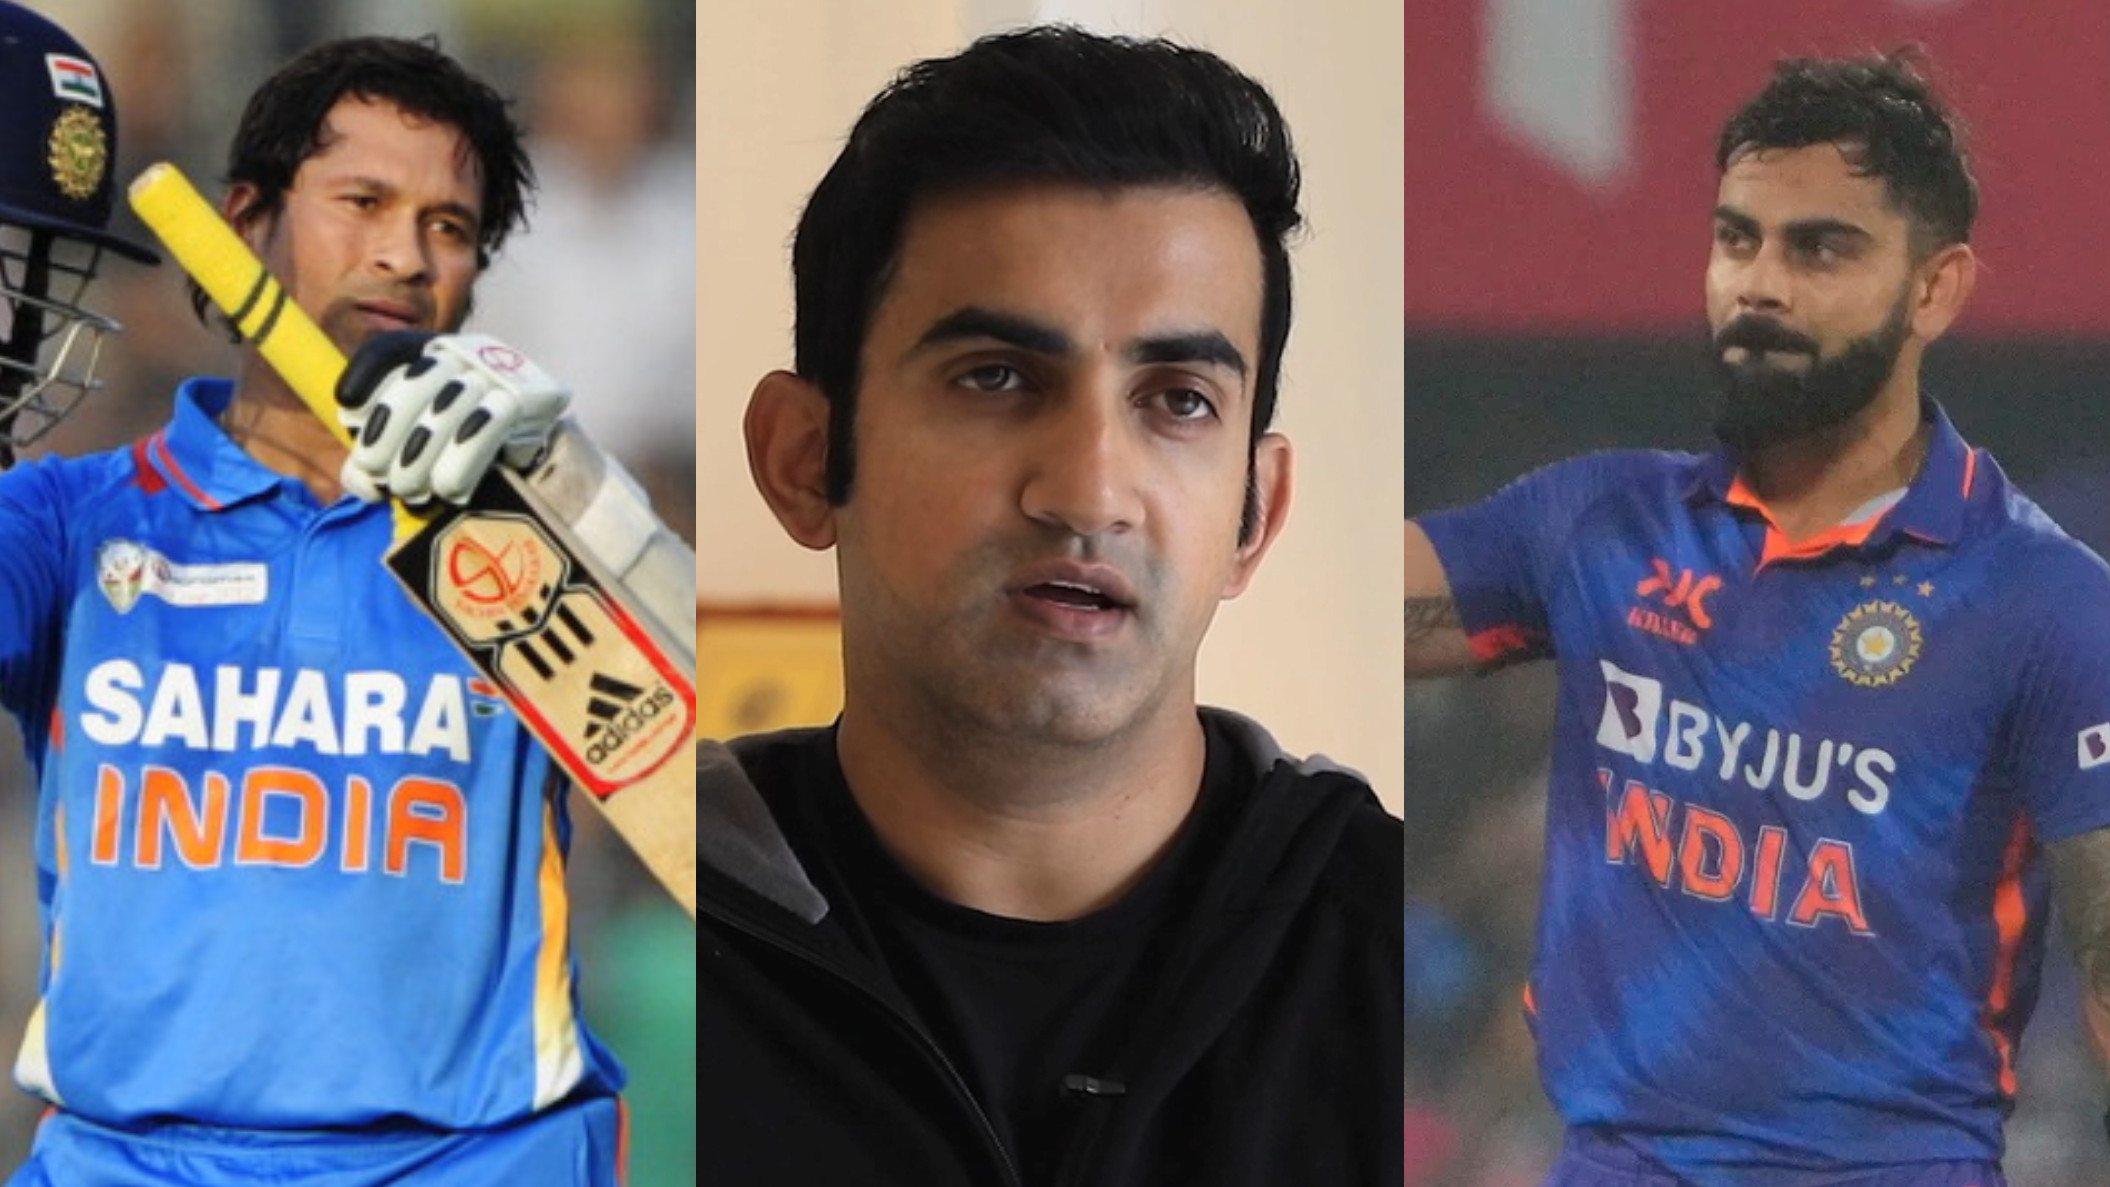 IND v SL 2023: Gambhir says unfair to compare eras of Tendulkar and Kohli in ODIs since 'rules have changed'